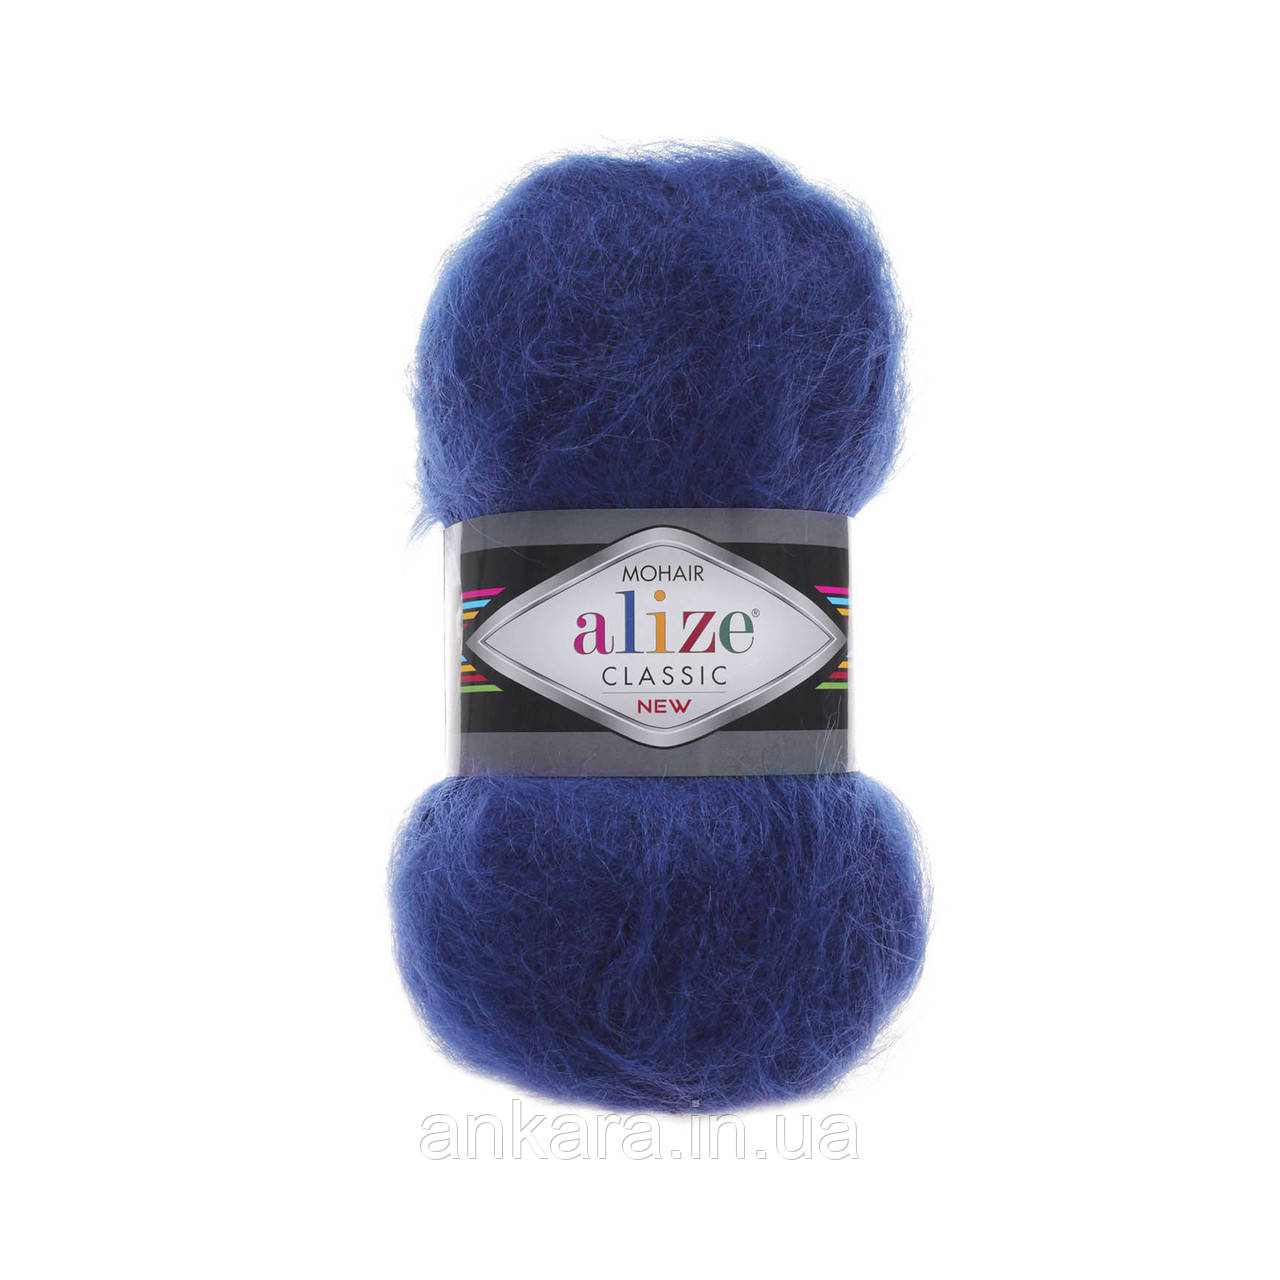 Alize Mohair Classic 409